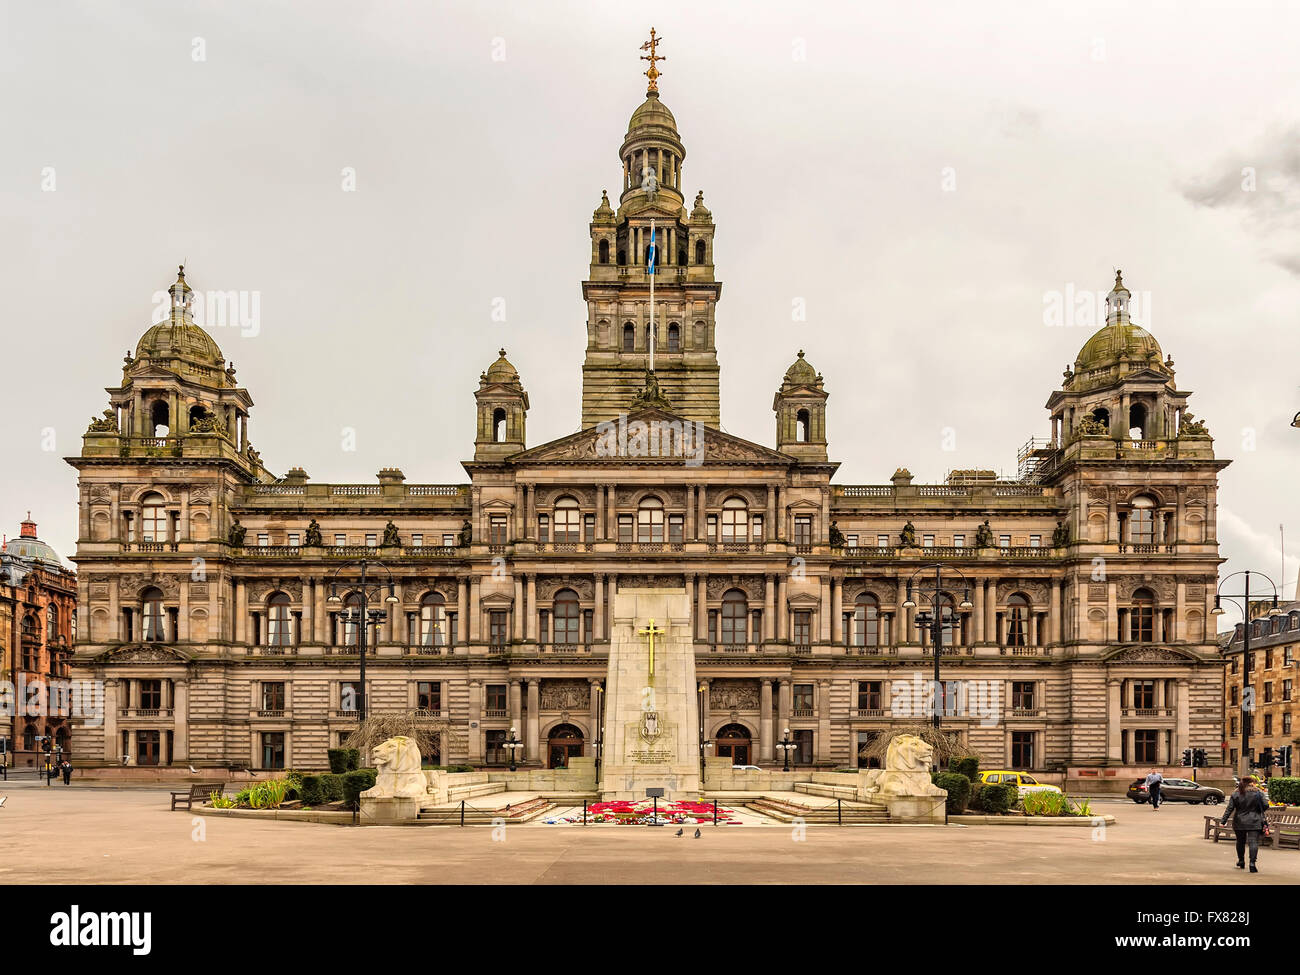 The Cenotaph war memorial in front of the City Chambers in George Square, Glasgow, Scotland Stock Photo